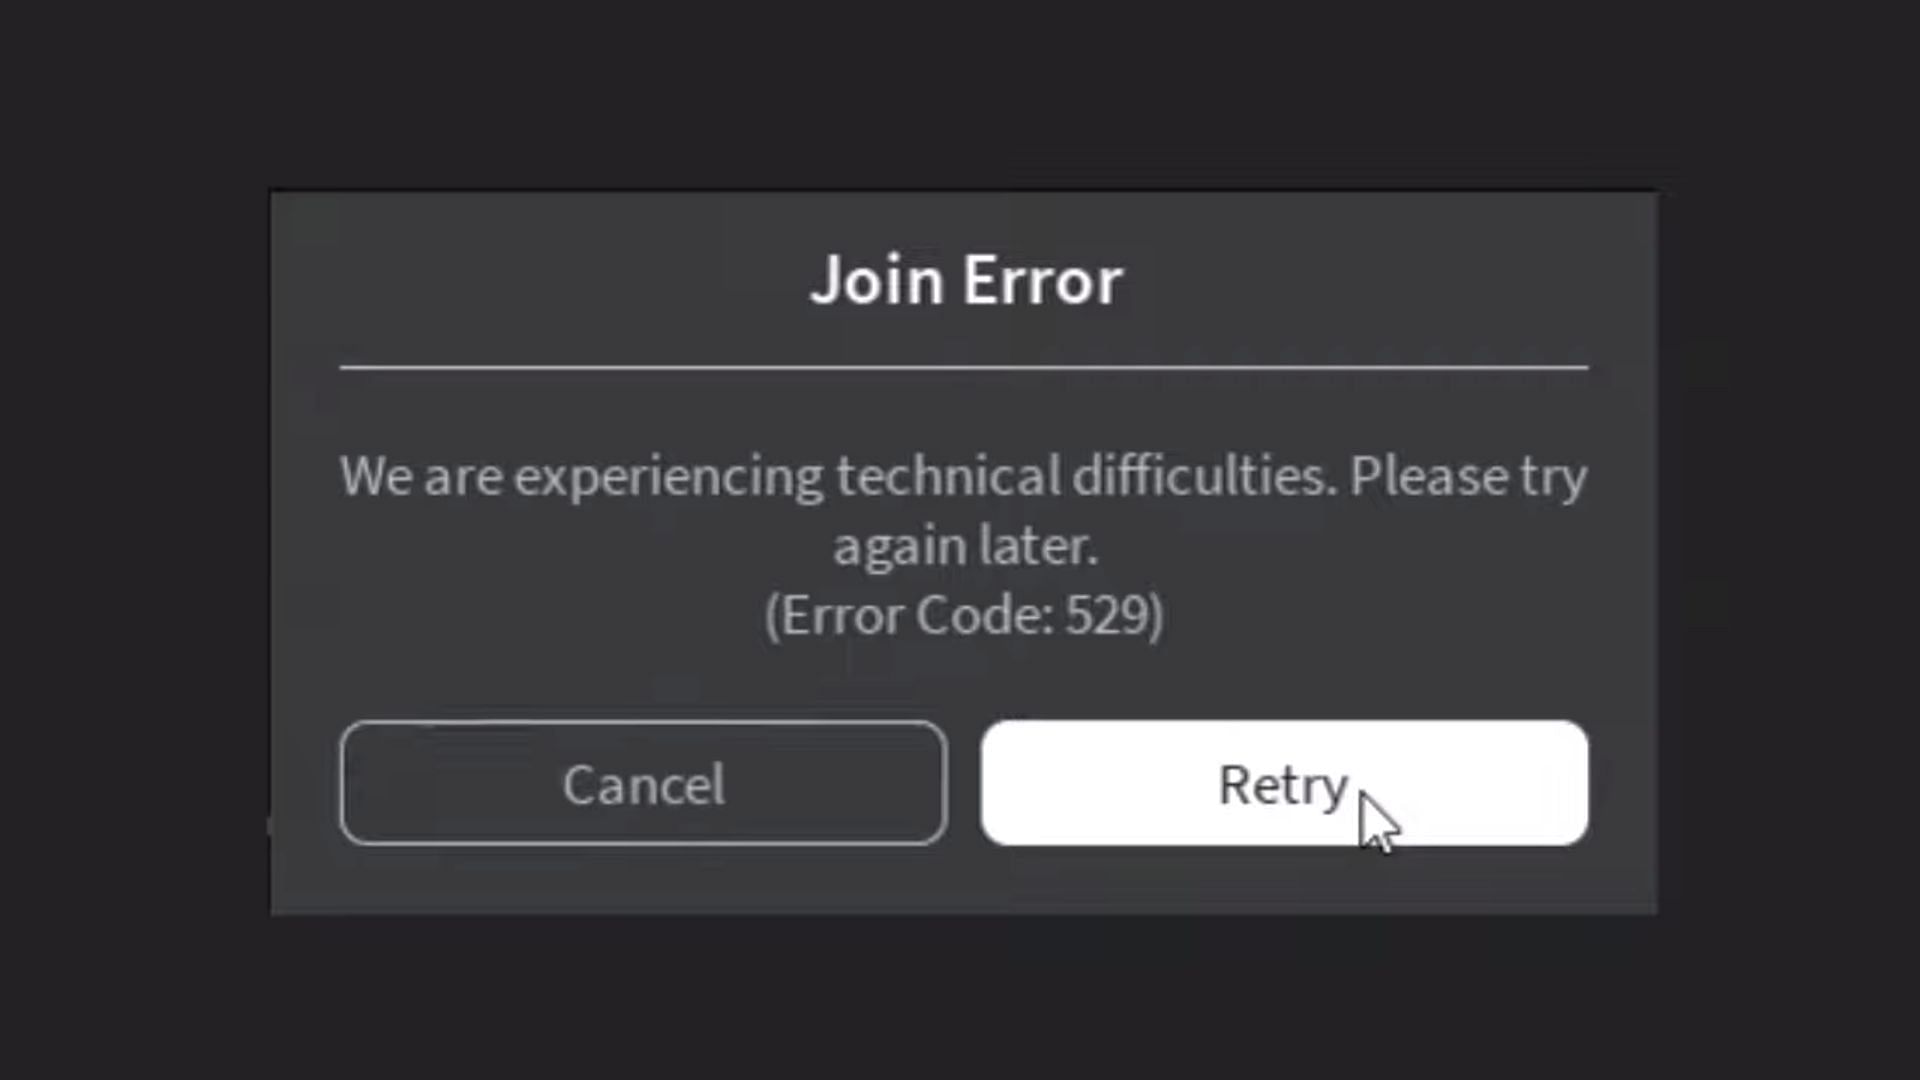 Roblox error code 529: How to fix, possible reasons and more revealed